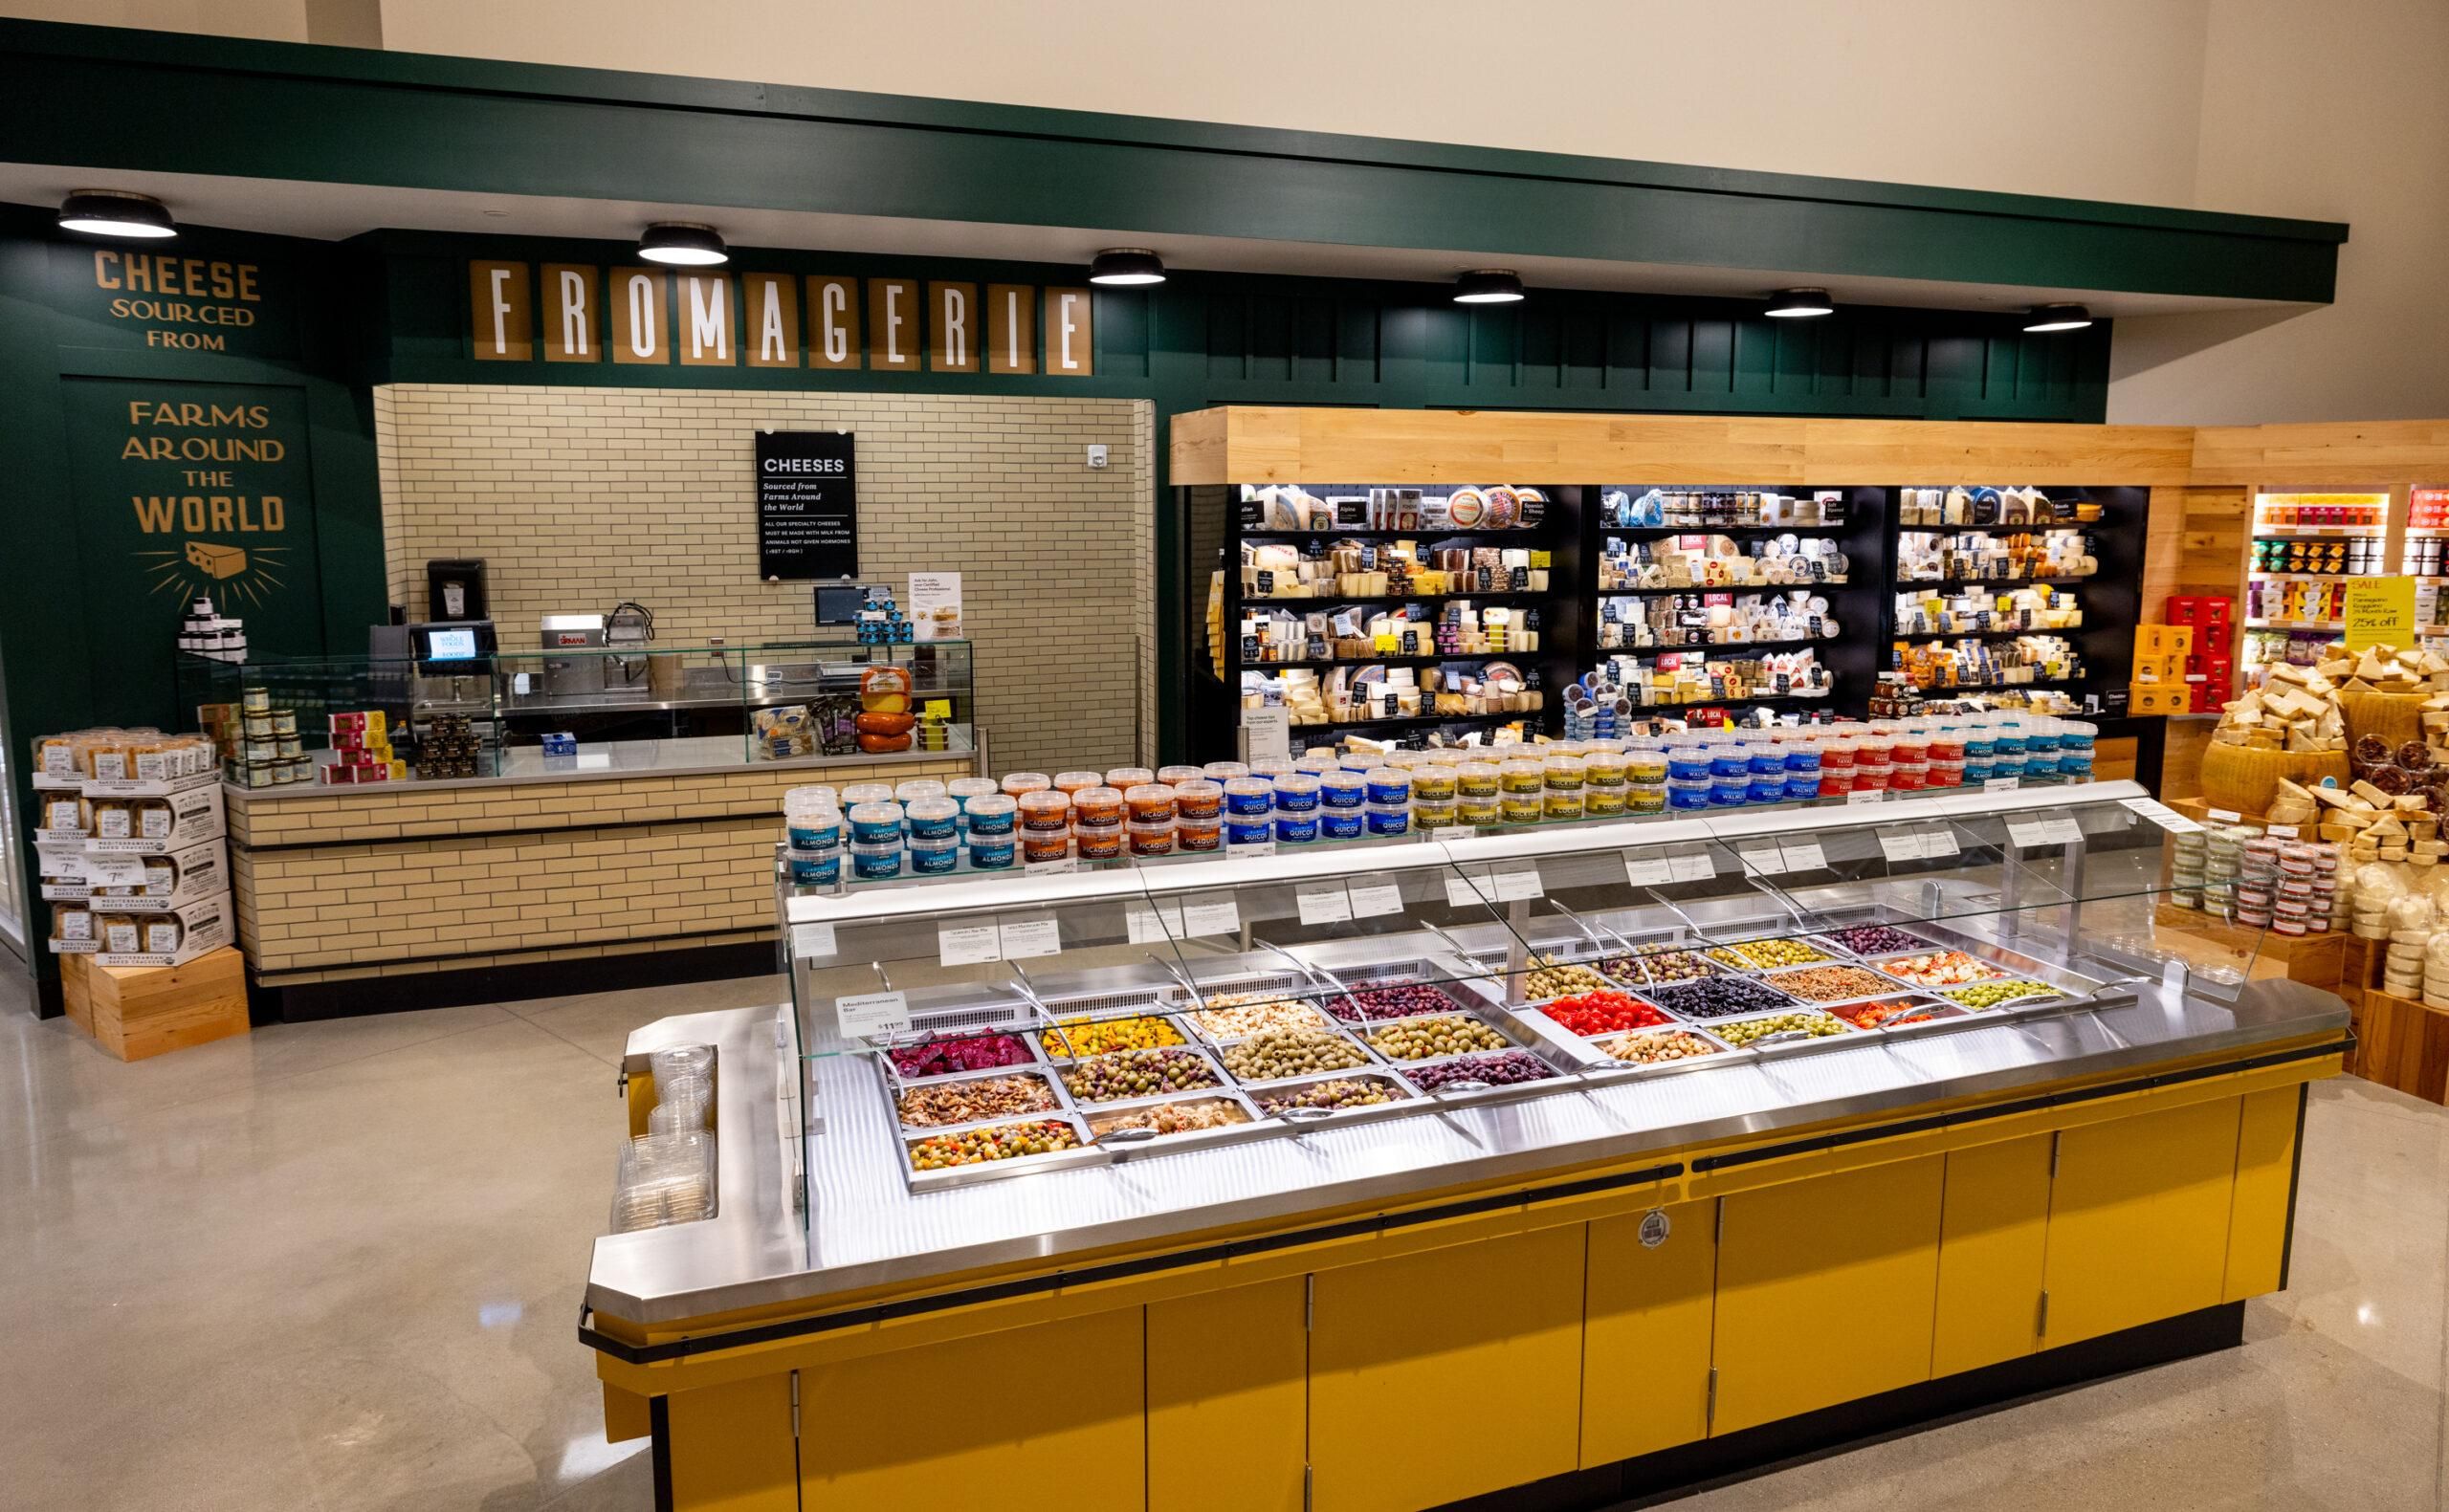 A view of the interior of Whole Foods with an olive bar